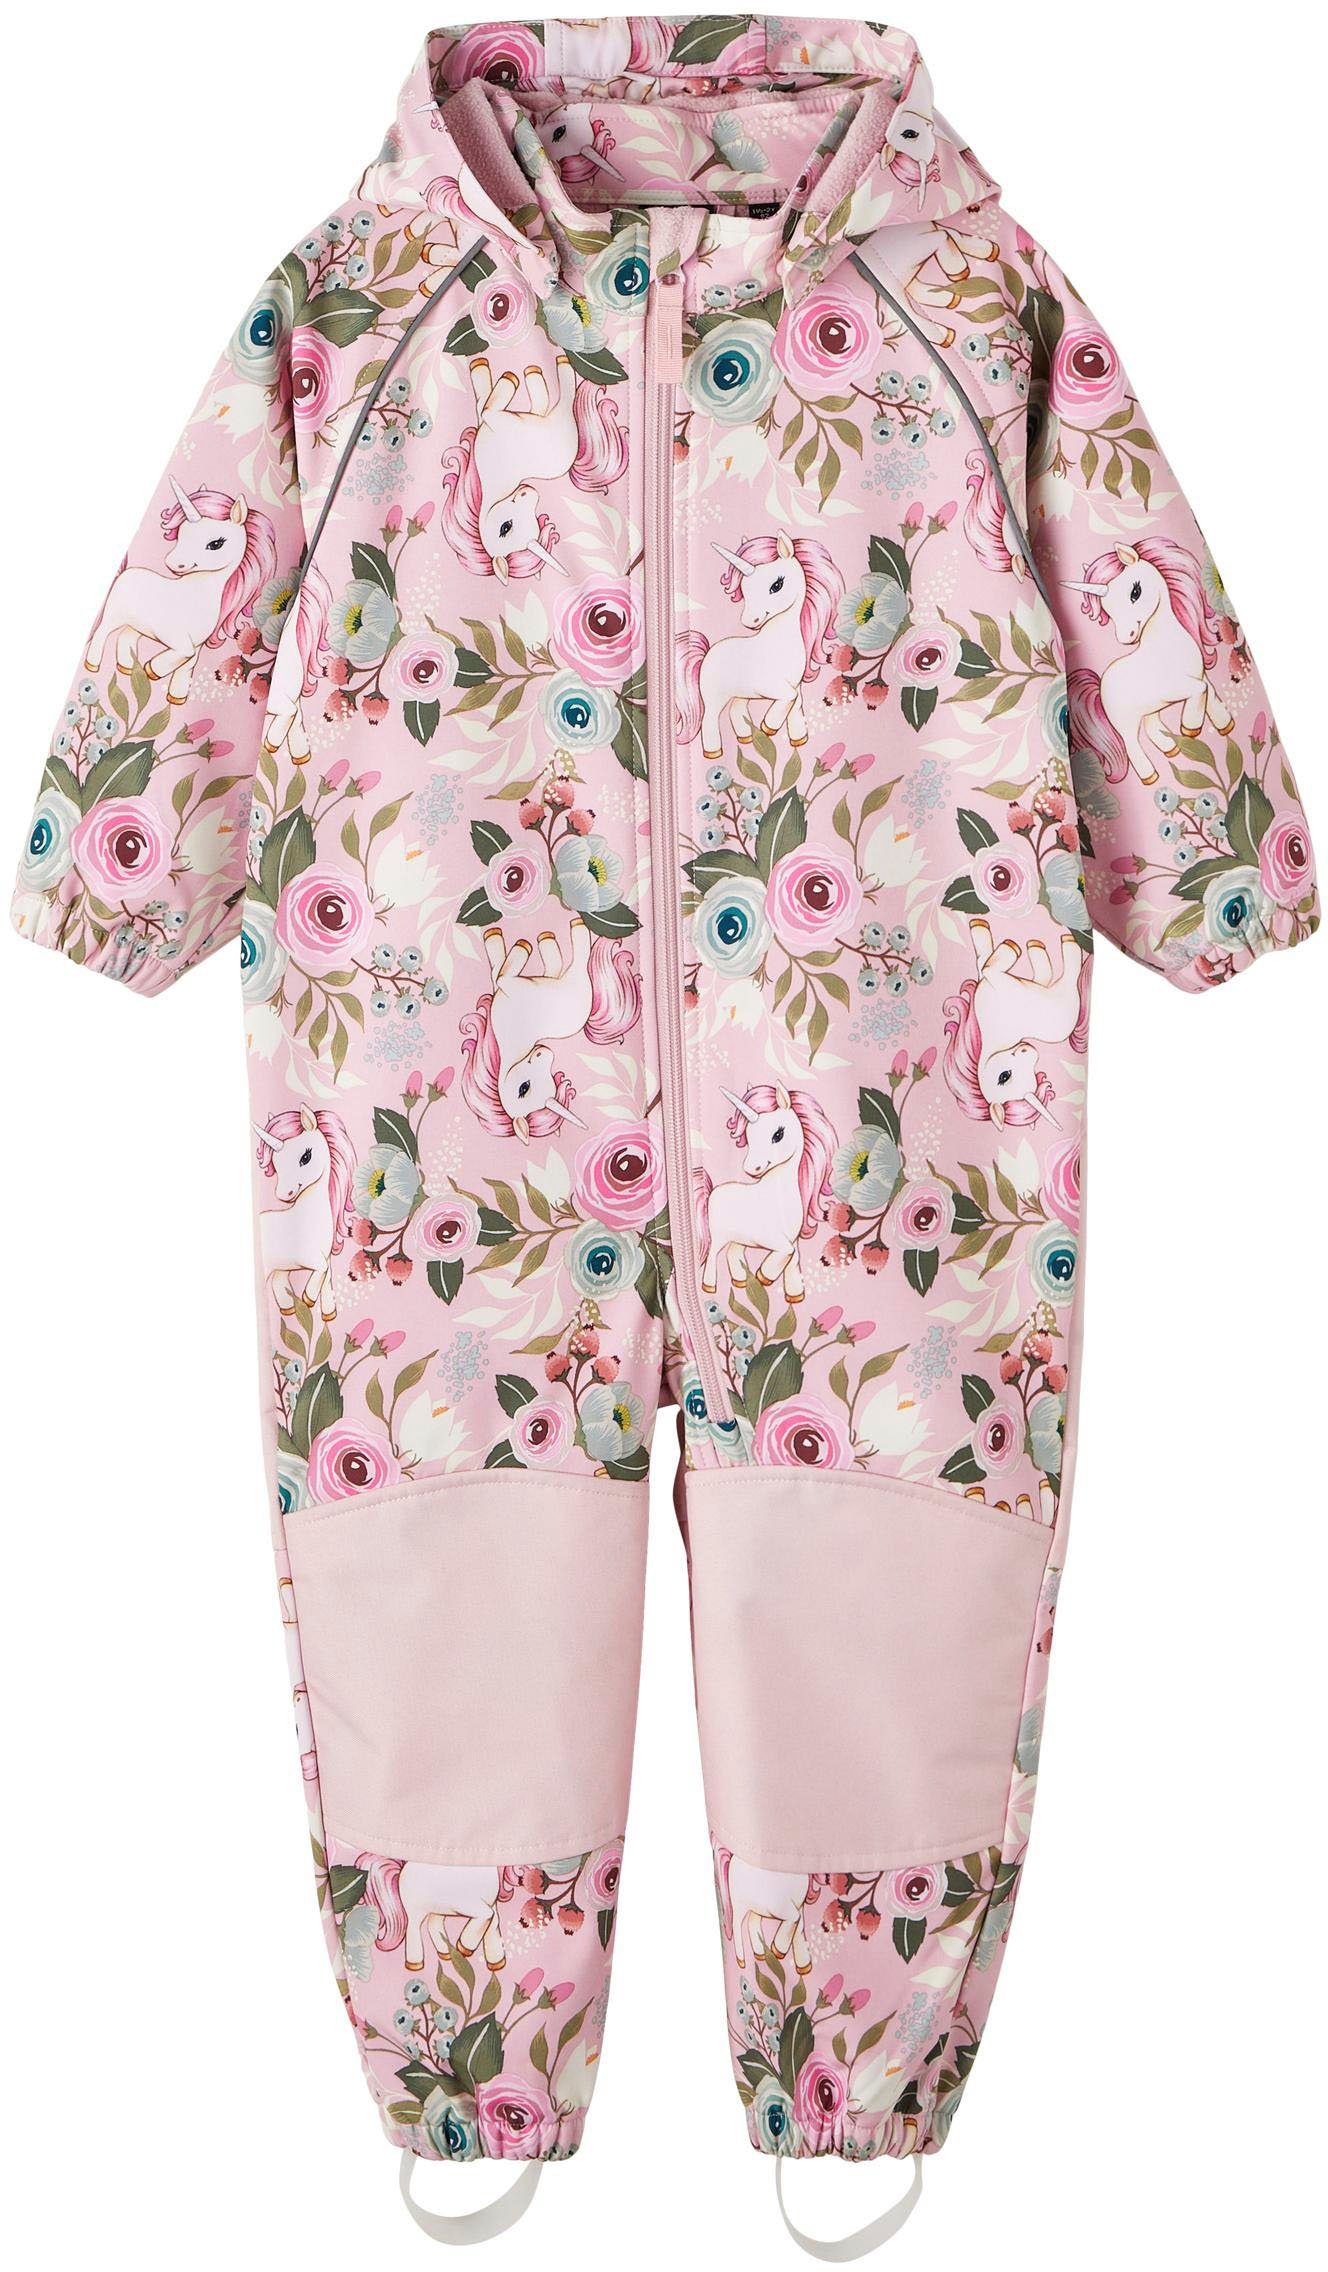 2FO NOOS It nectar FLORAL Name pink SUIT NMFALFA Softshelloverall